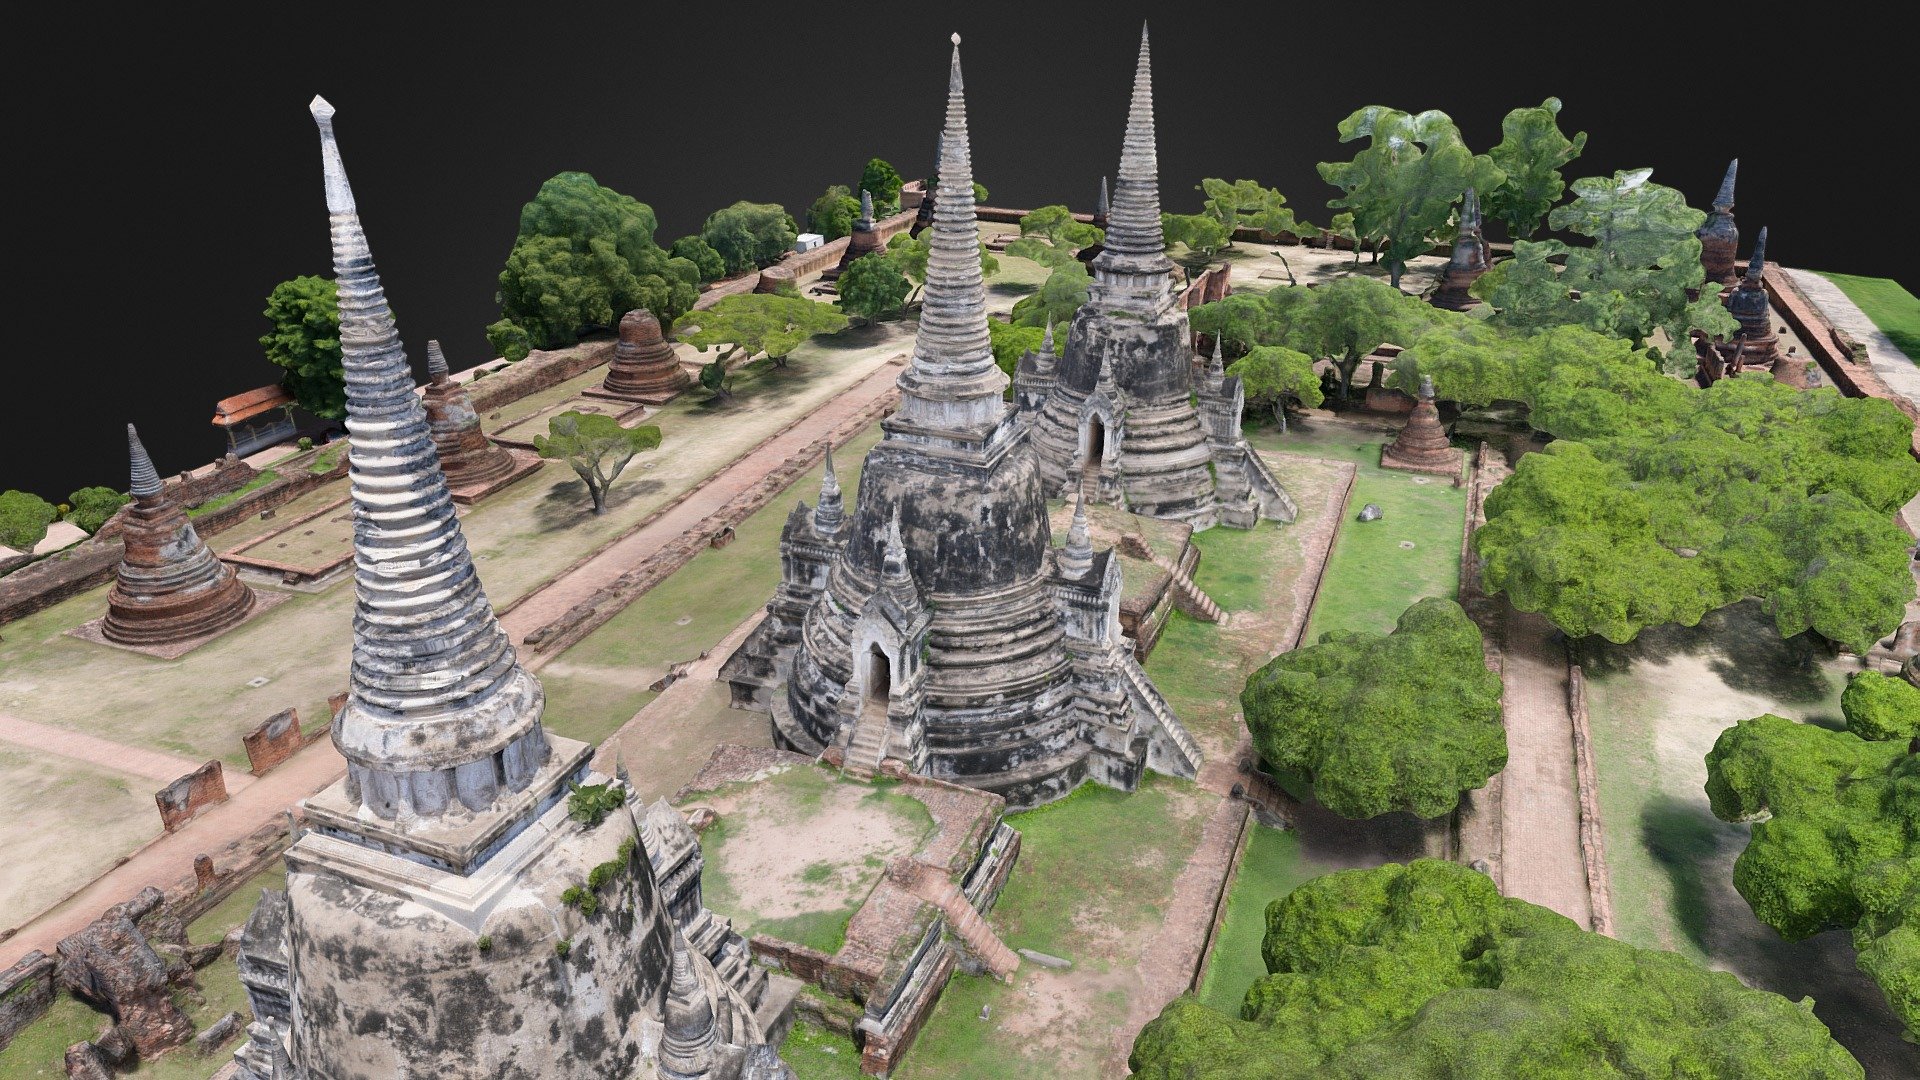 Ayutthaya - Wat Phra Si Sanphet, Thailand.

Processed from 4946 aerial photos (collected by CyArk).

Photos distrubuted by Open Heritage 3D.

https://doi.org/10.26301/taz6-n215 - Wat Phra Si Sanphet - Download Free 3D model by Agisoft 3d model